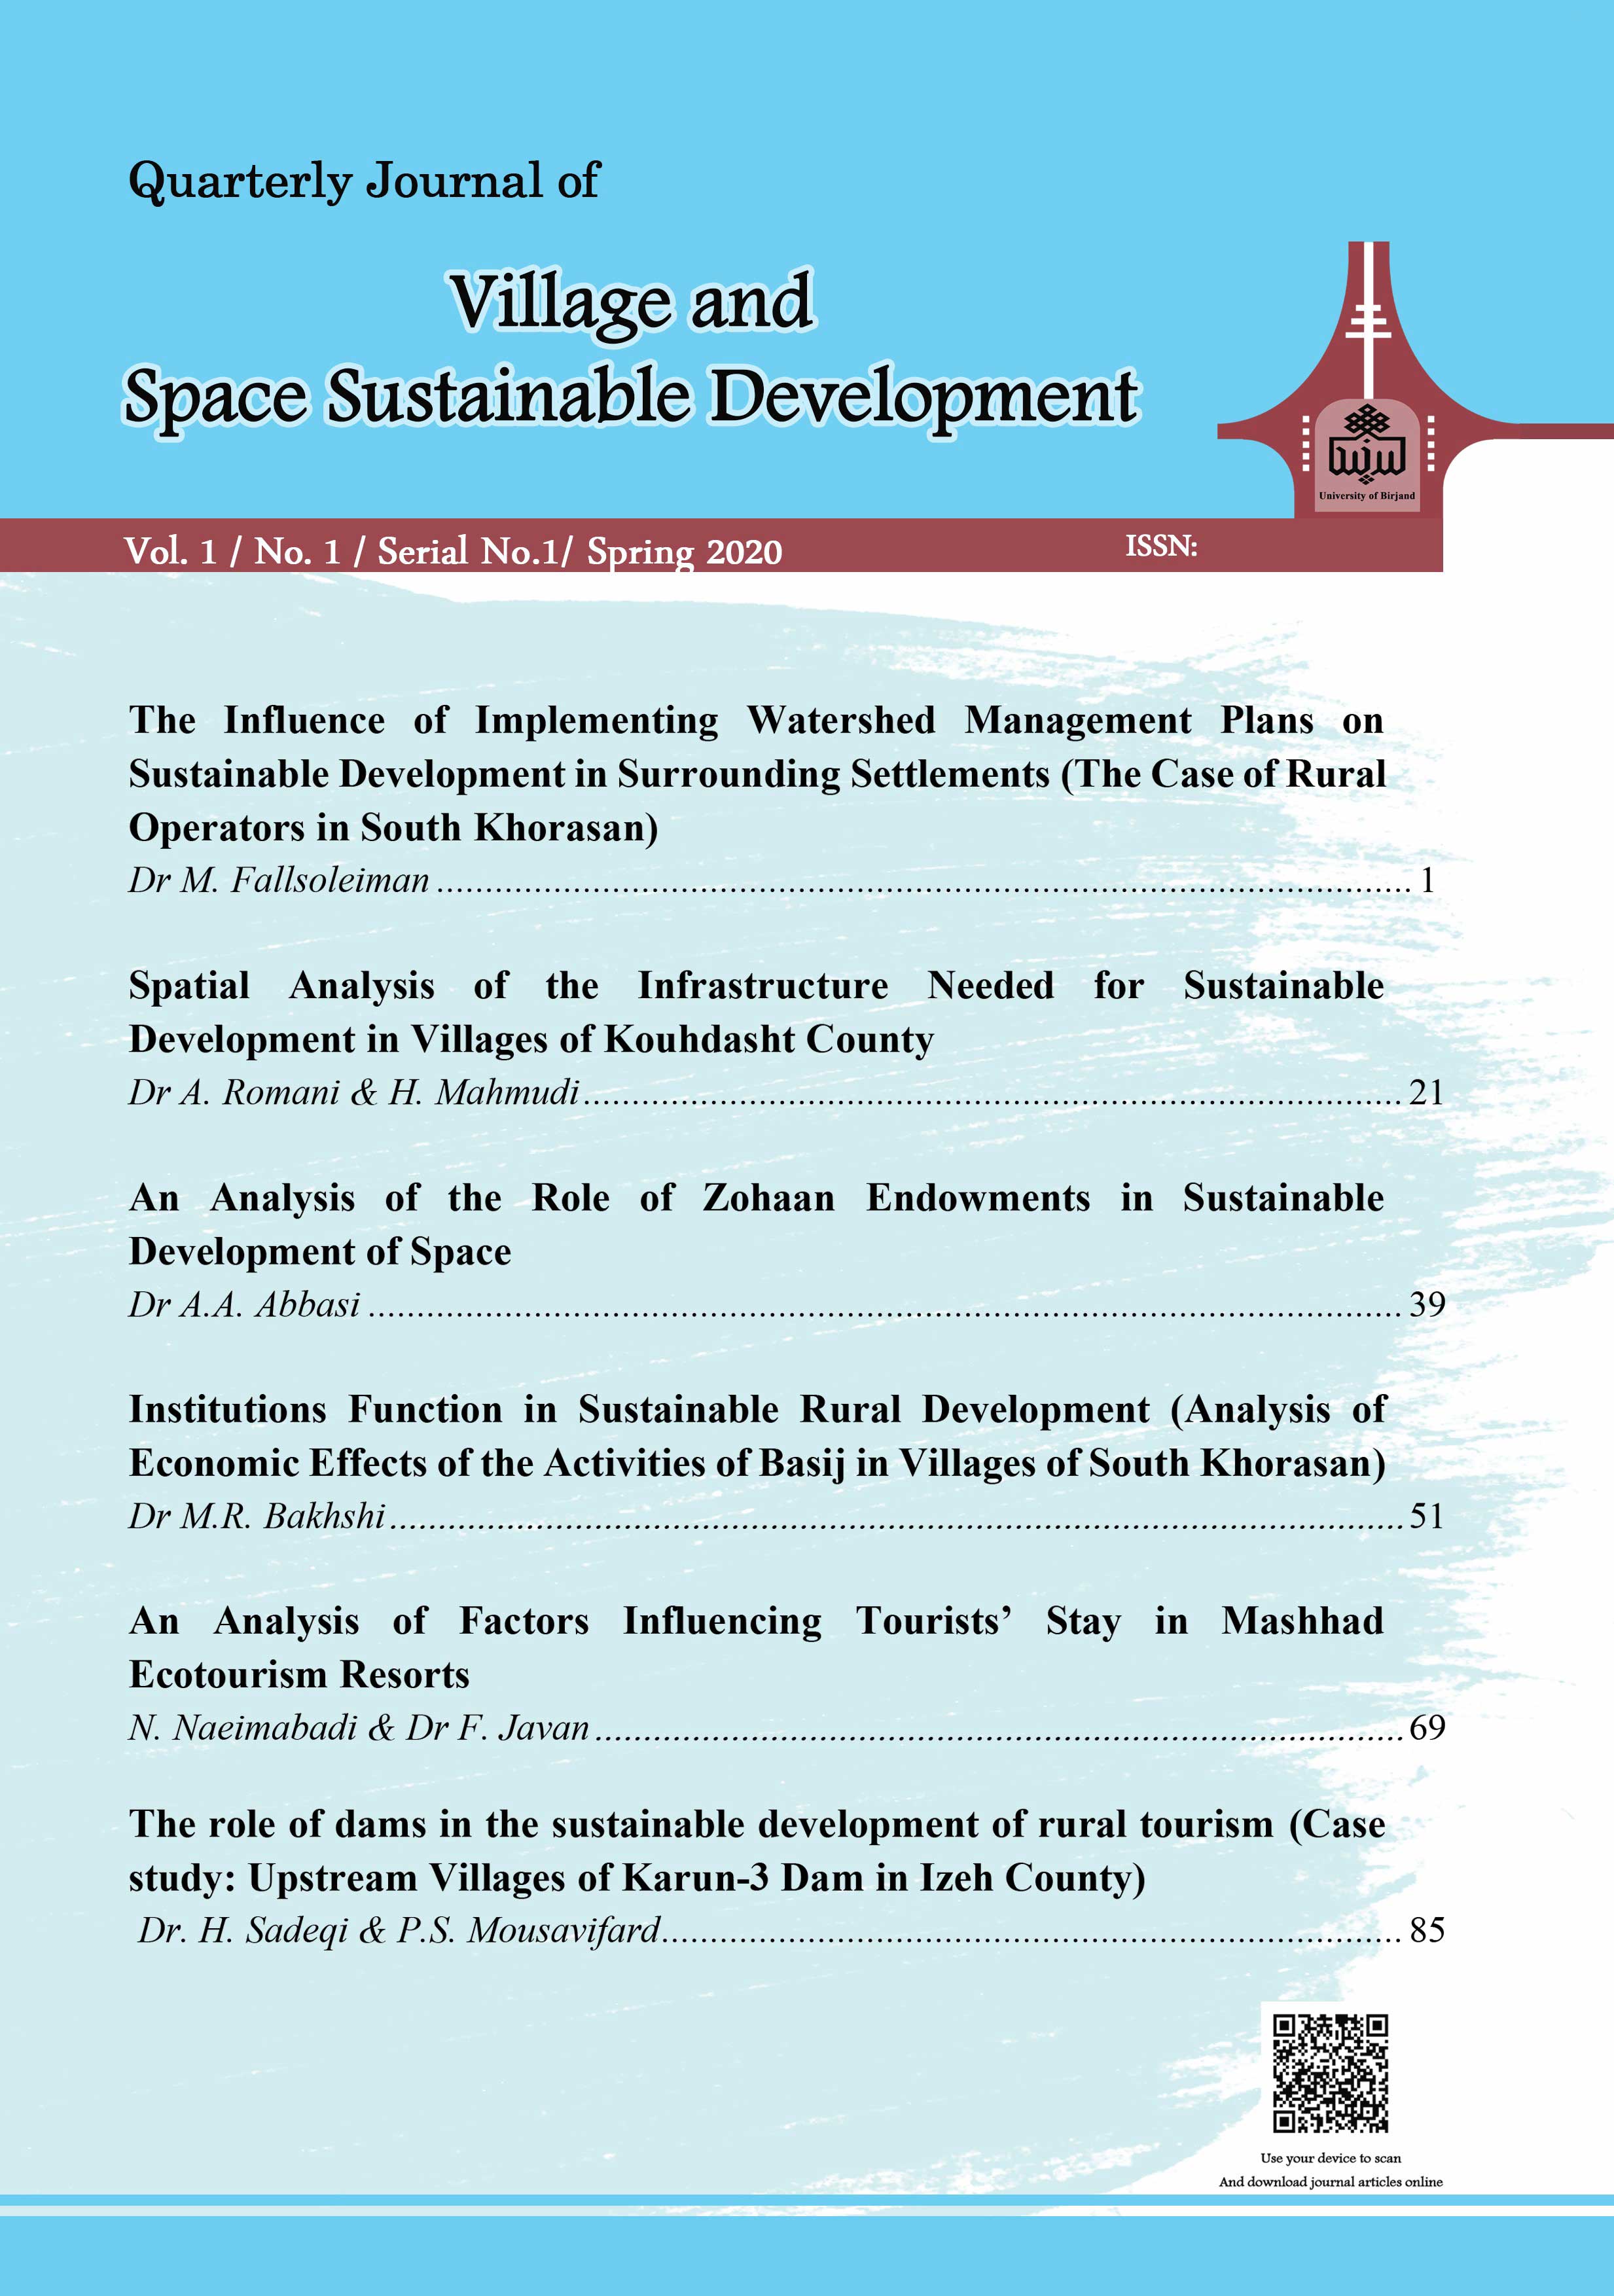 Quarterly Journal of Village and Space Sustainable Development